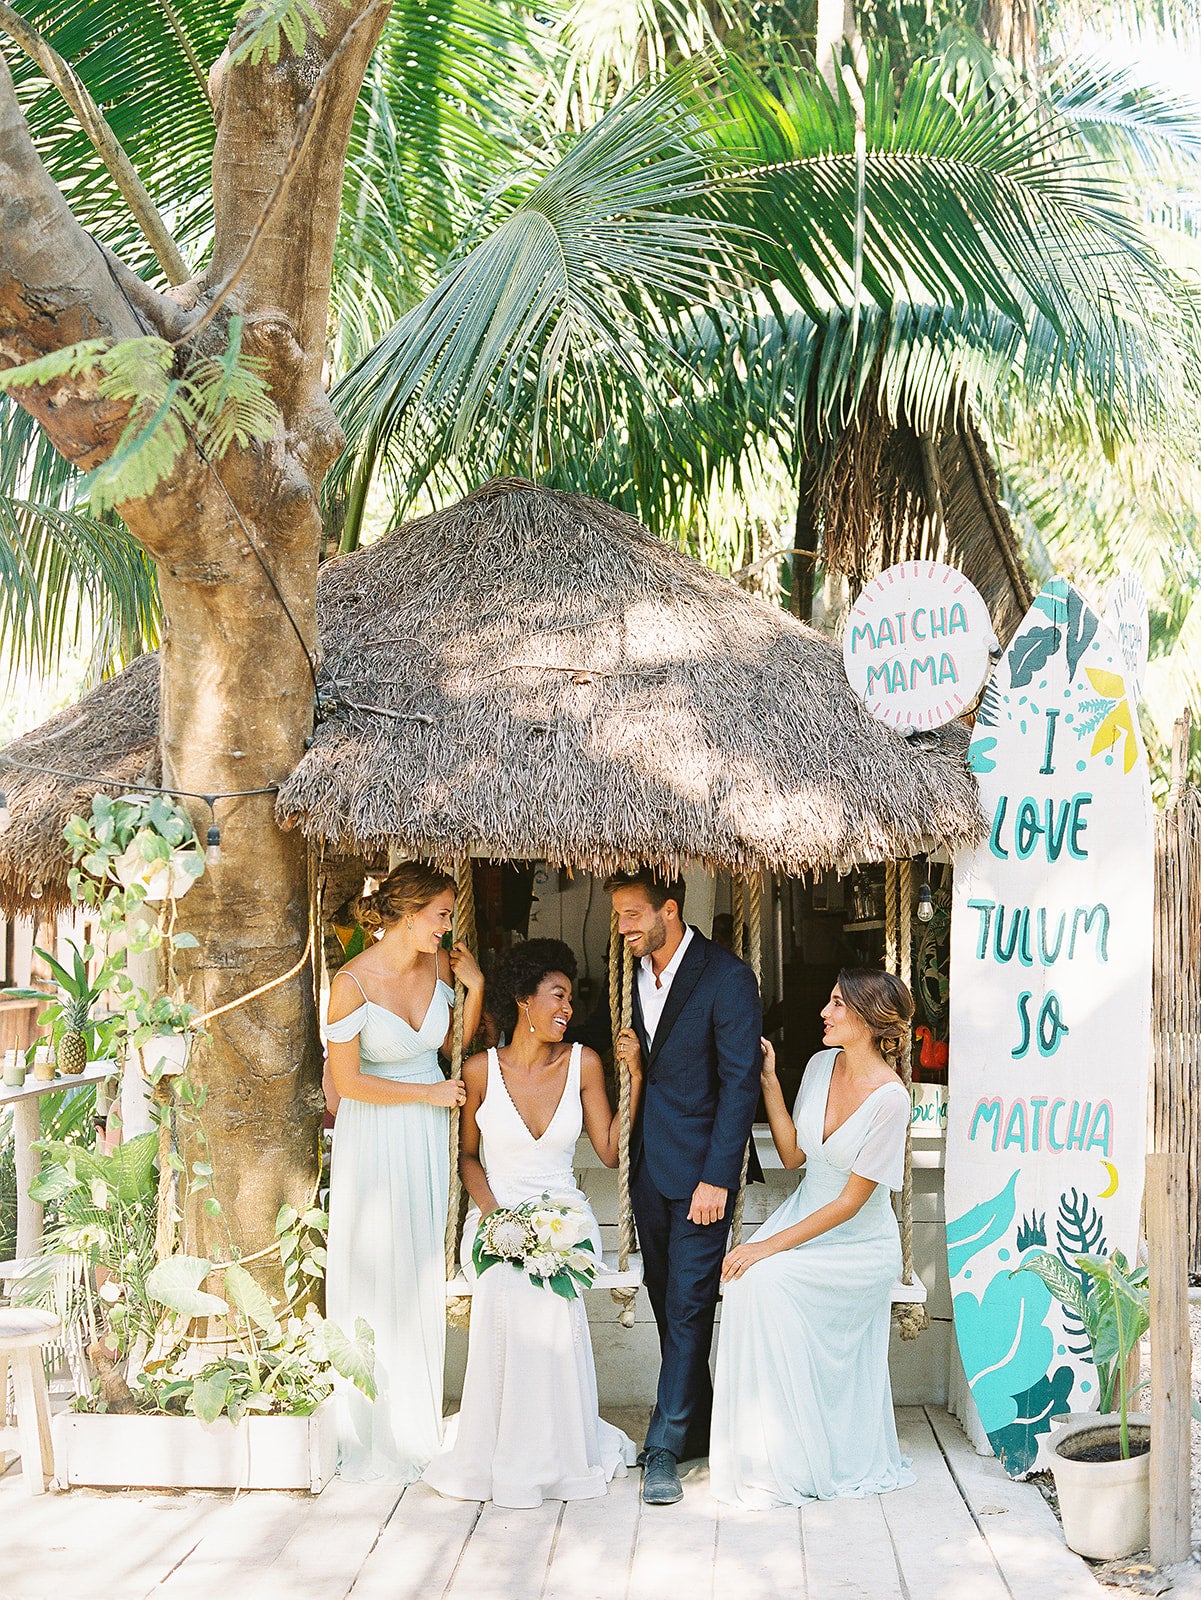 We’re Obsessed with Weddings in Tulum–Here’s Why! We took Kleinfeld Bridal wedding dresses and Kleinfeld Bridal Party bridesmaids dresses to Tulum, Mexico for a fun photoshoot on the beach full of flowers, sun, sand and fun!